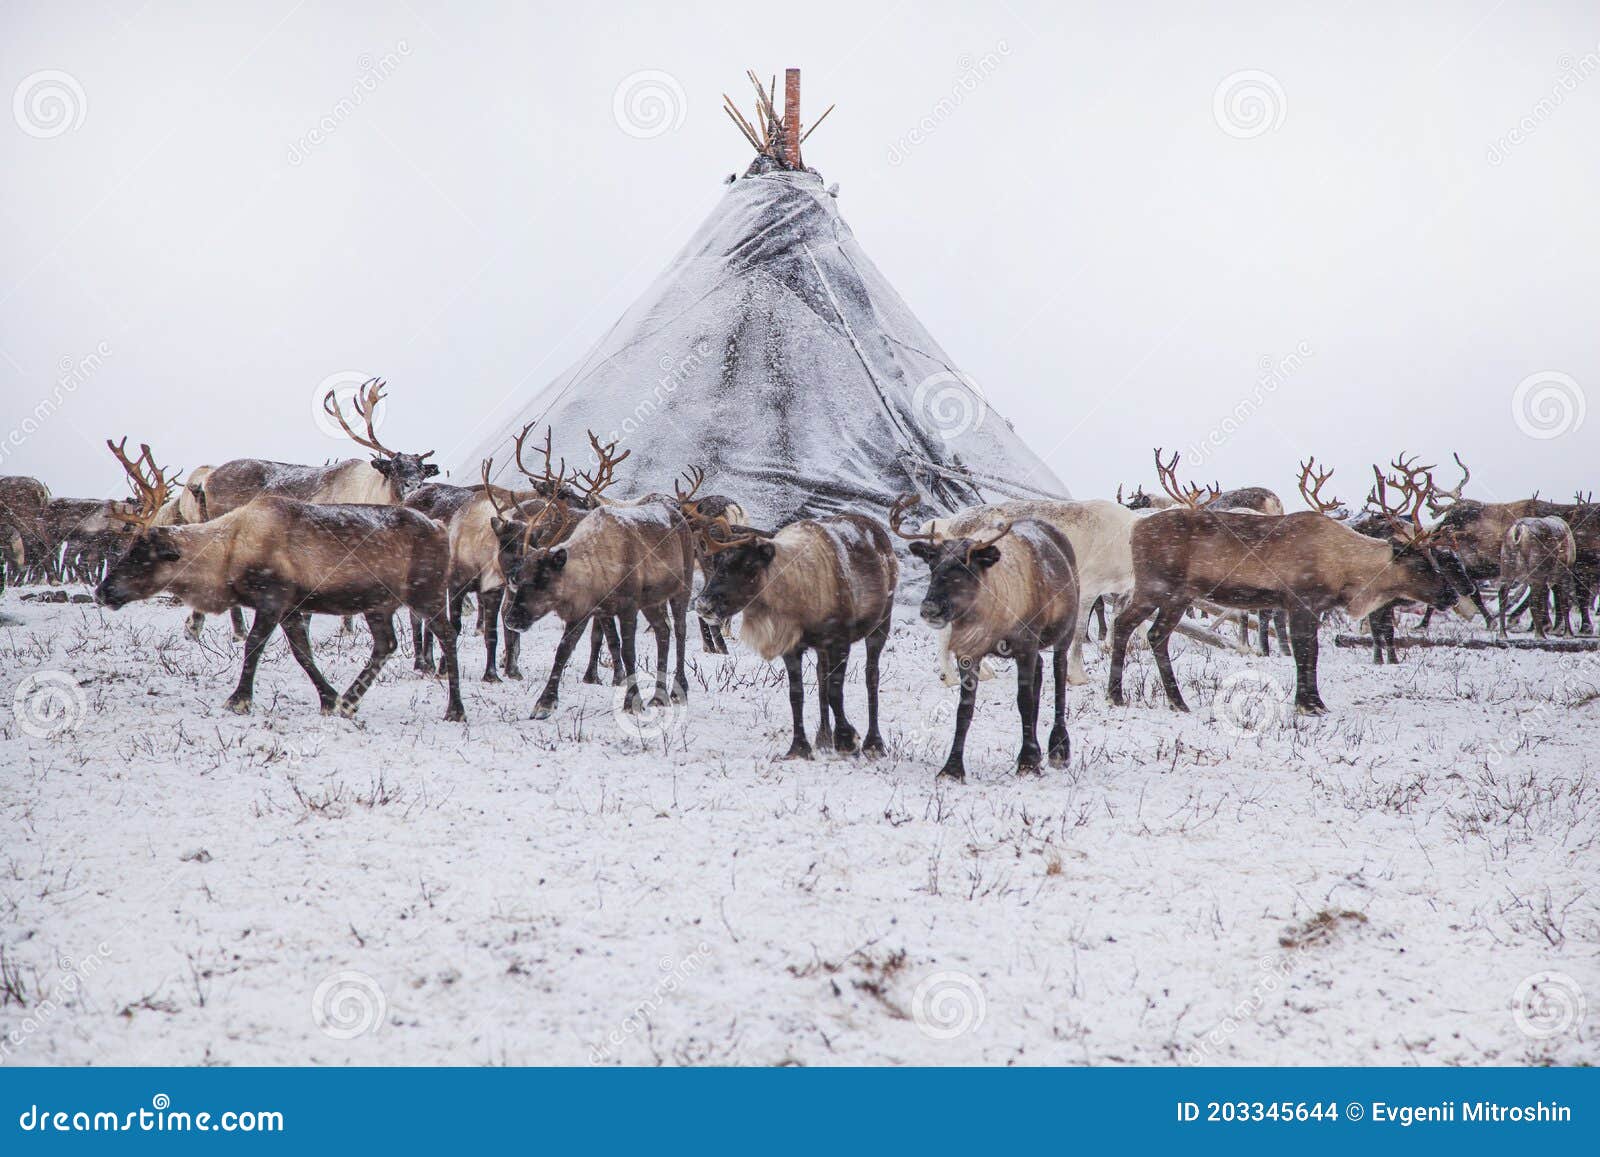 yamal peninsula  siberia. a herd of reindeer in winter  reindeers migrate for a best grazing in the tundra nearby of polar circle